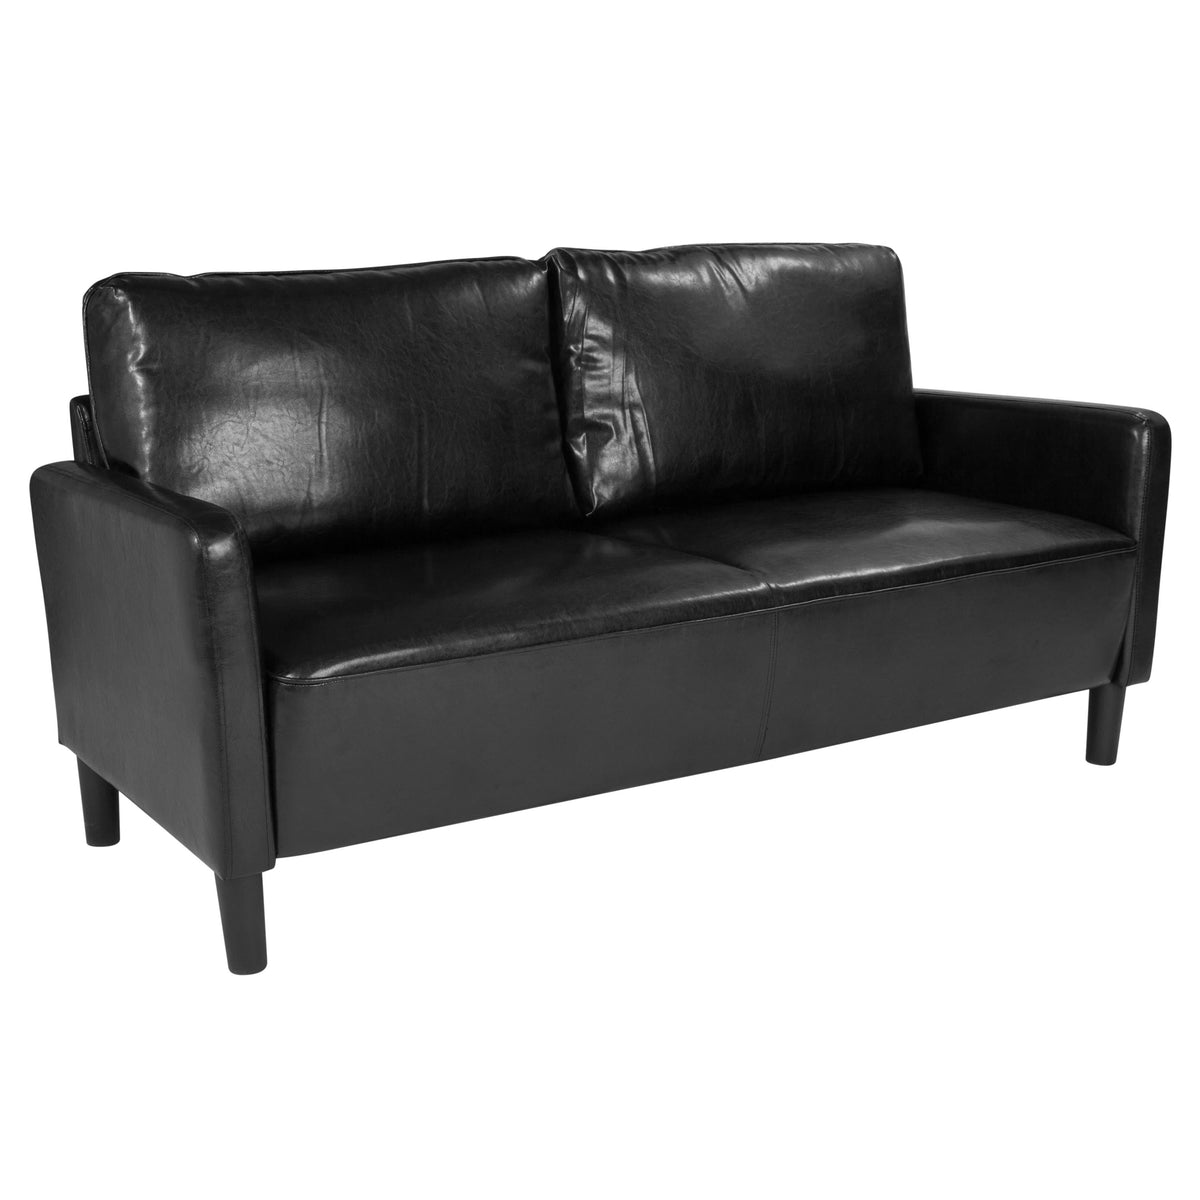 Black LeatherSoft |#| Upholstered Living Room Sofa with Straight Arms in Black LeatherSoft